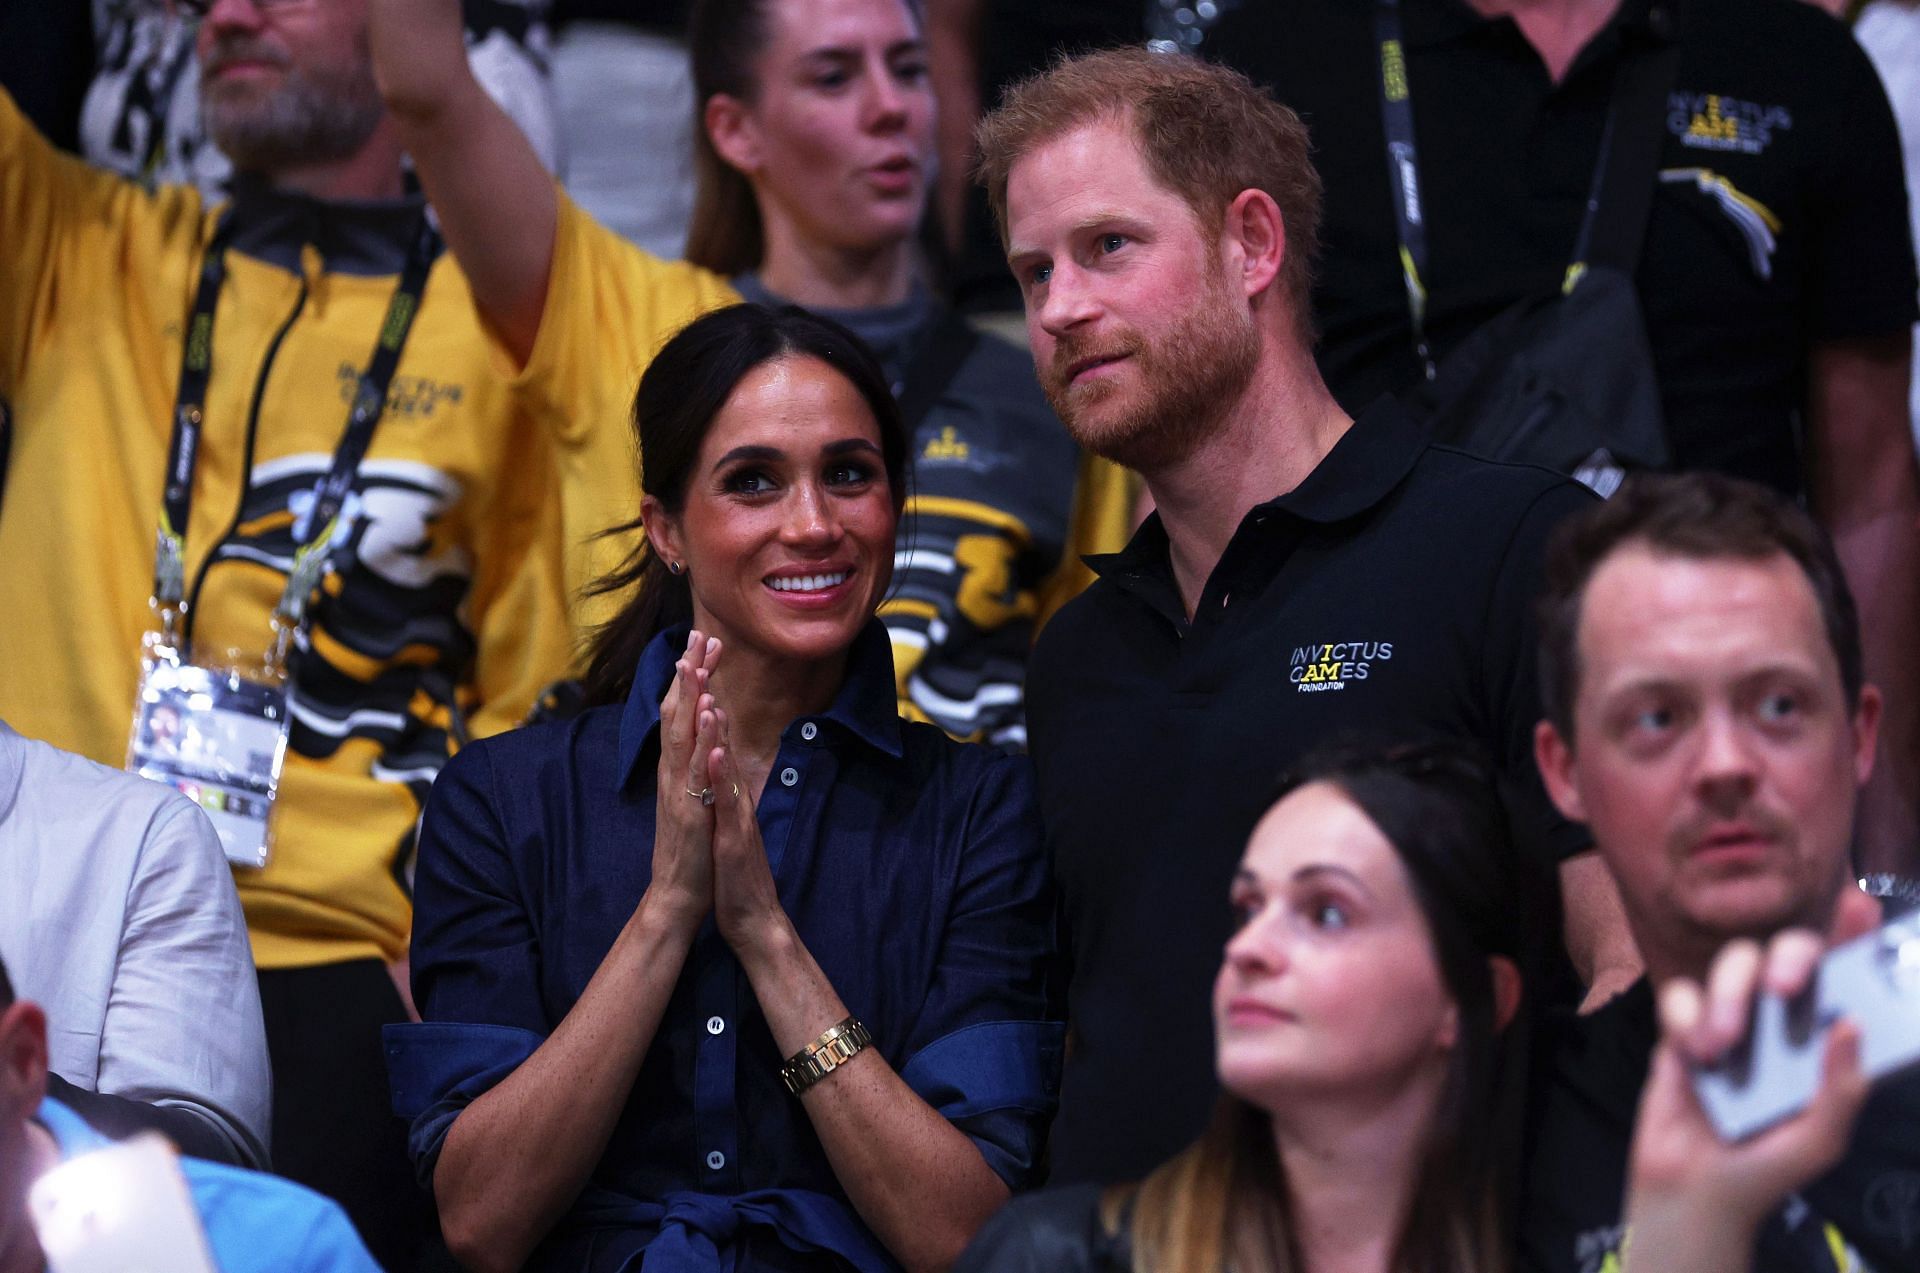 Harry and Meghan at the Invictus Games D&uuml;sseldorf 2023 (Photo by Dean Mouhtaropoulos/Getty Images for Invictus Games D&uuml;sseldorf 2023)